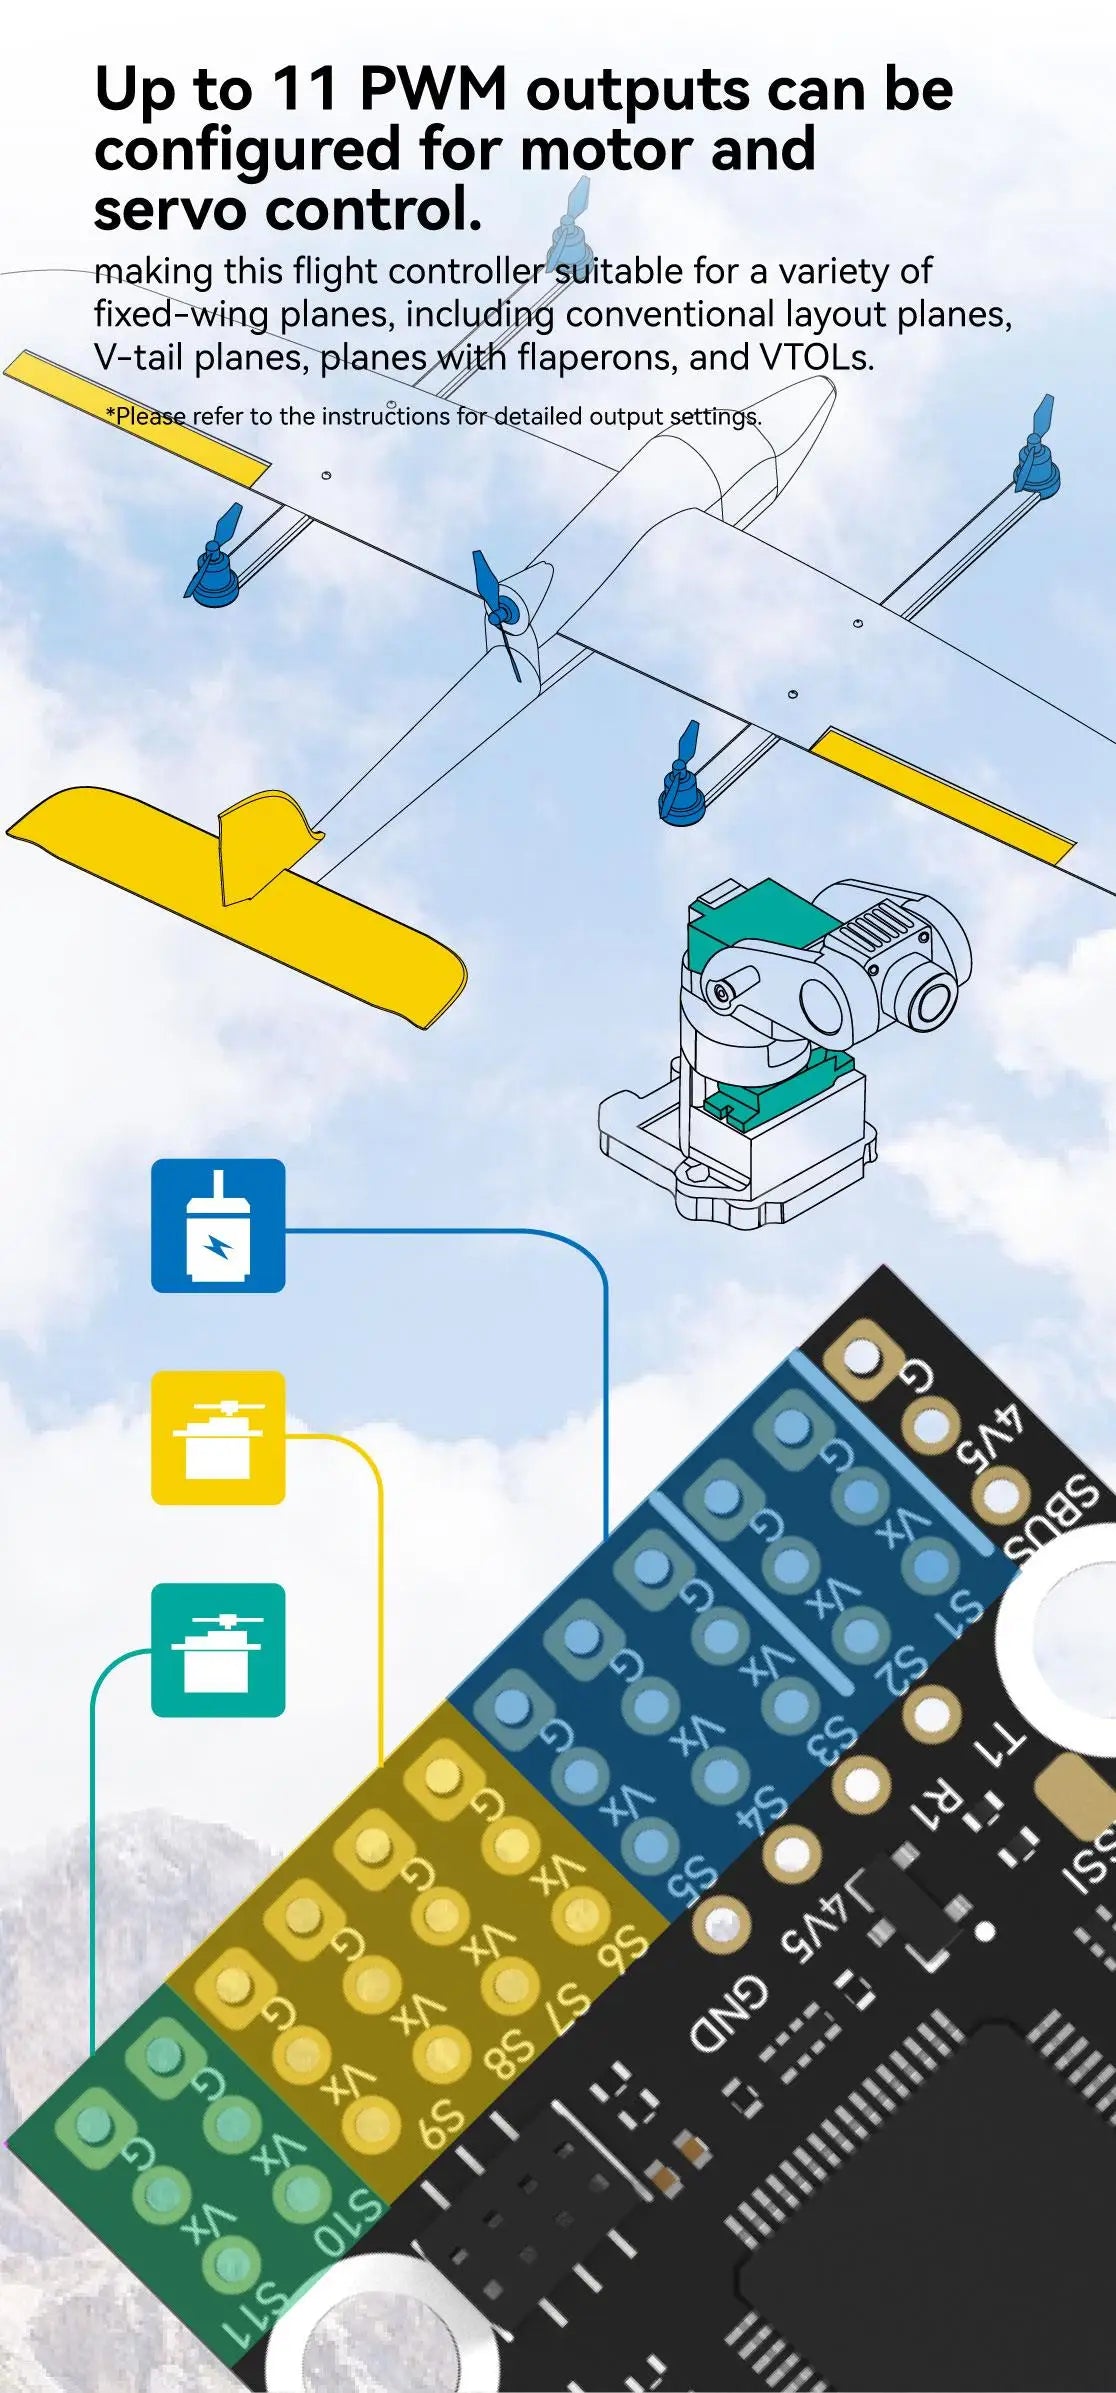 this flight controller is suitable for a variety of fixed-wing planes, including conventional layout